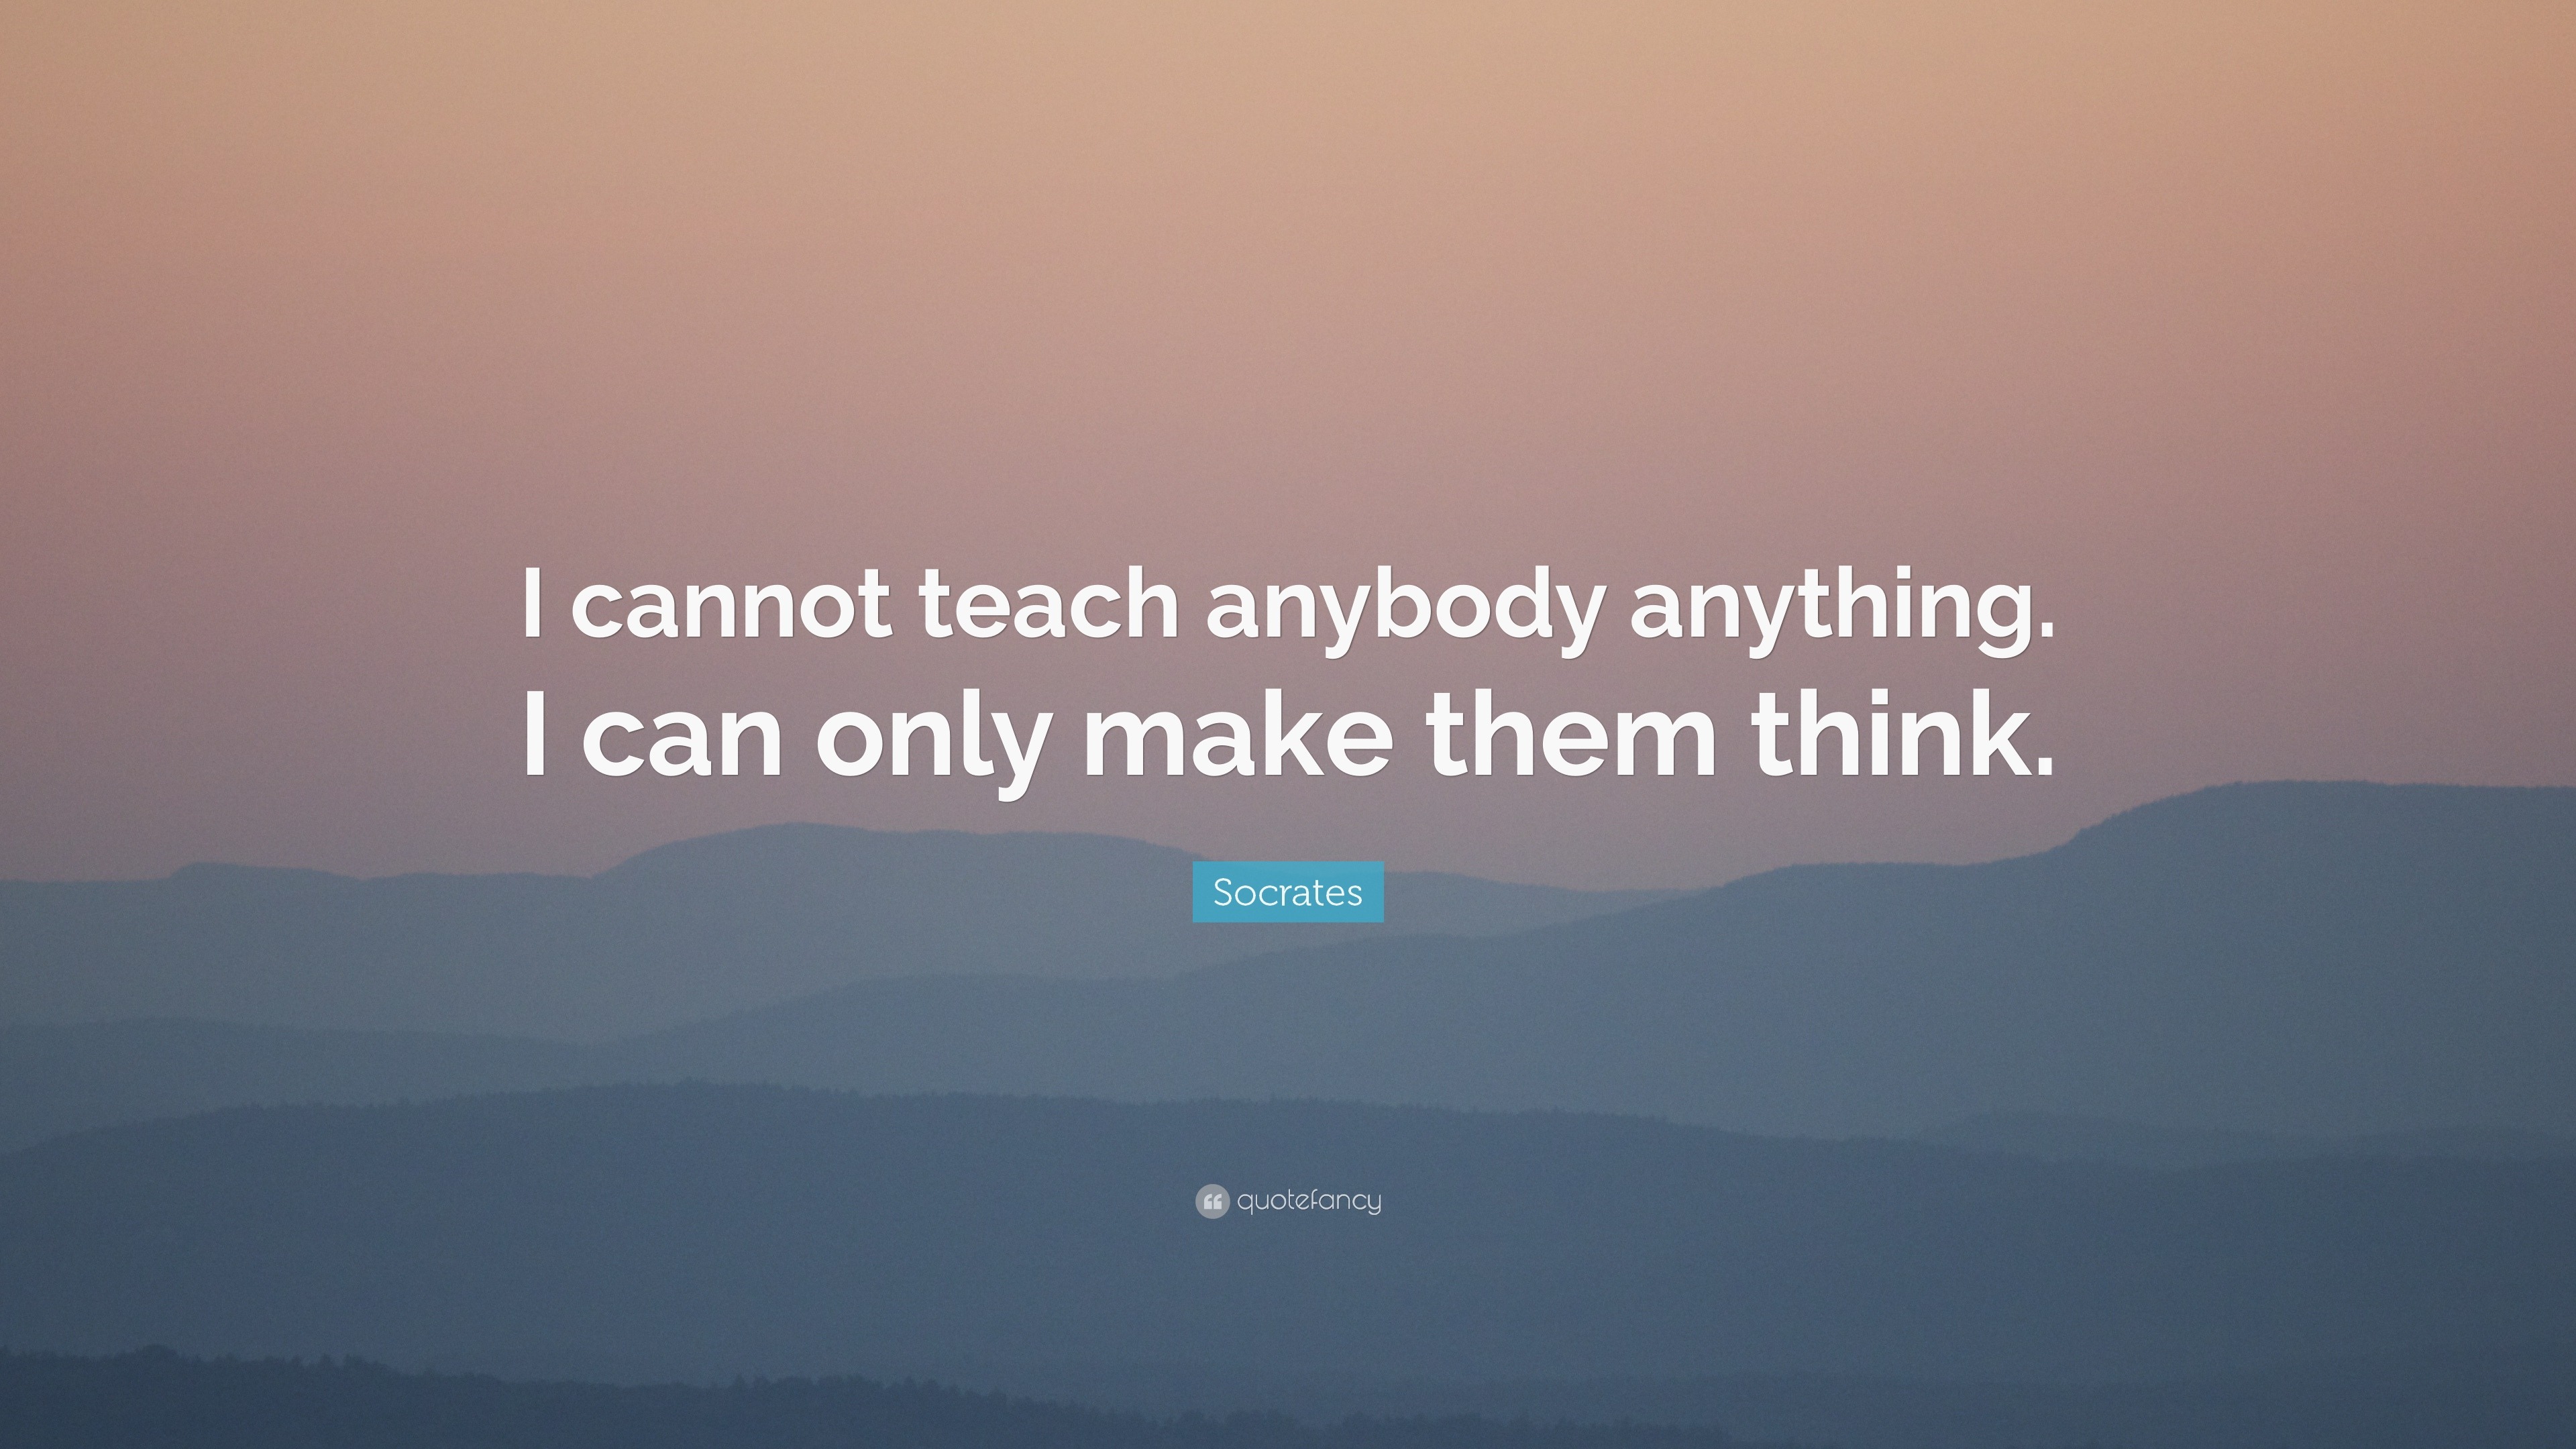 Socrates Quote: “I cannot teach anybody anything. I can only make them